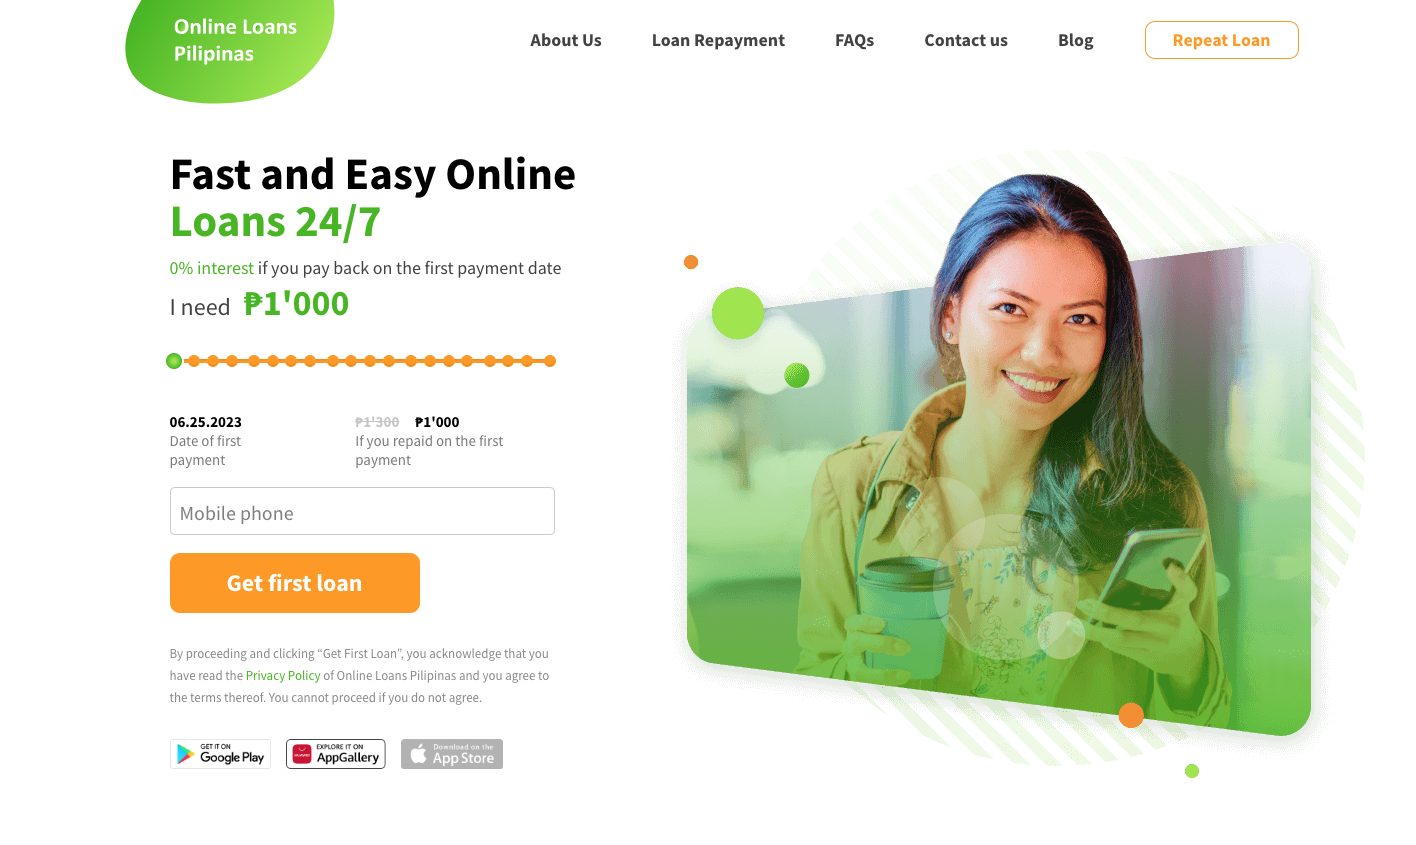 online loans pilipinas review - what is an online loans pilipinas loan